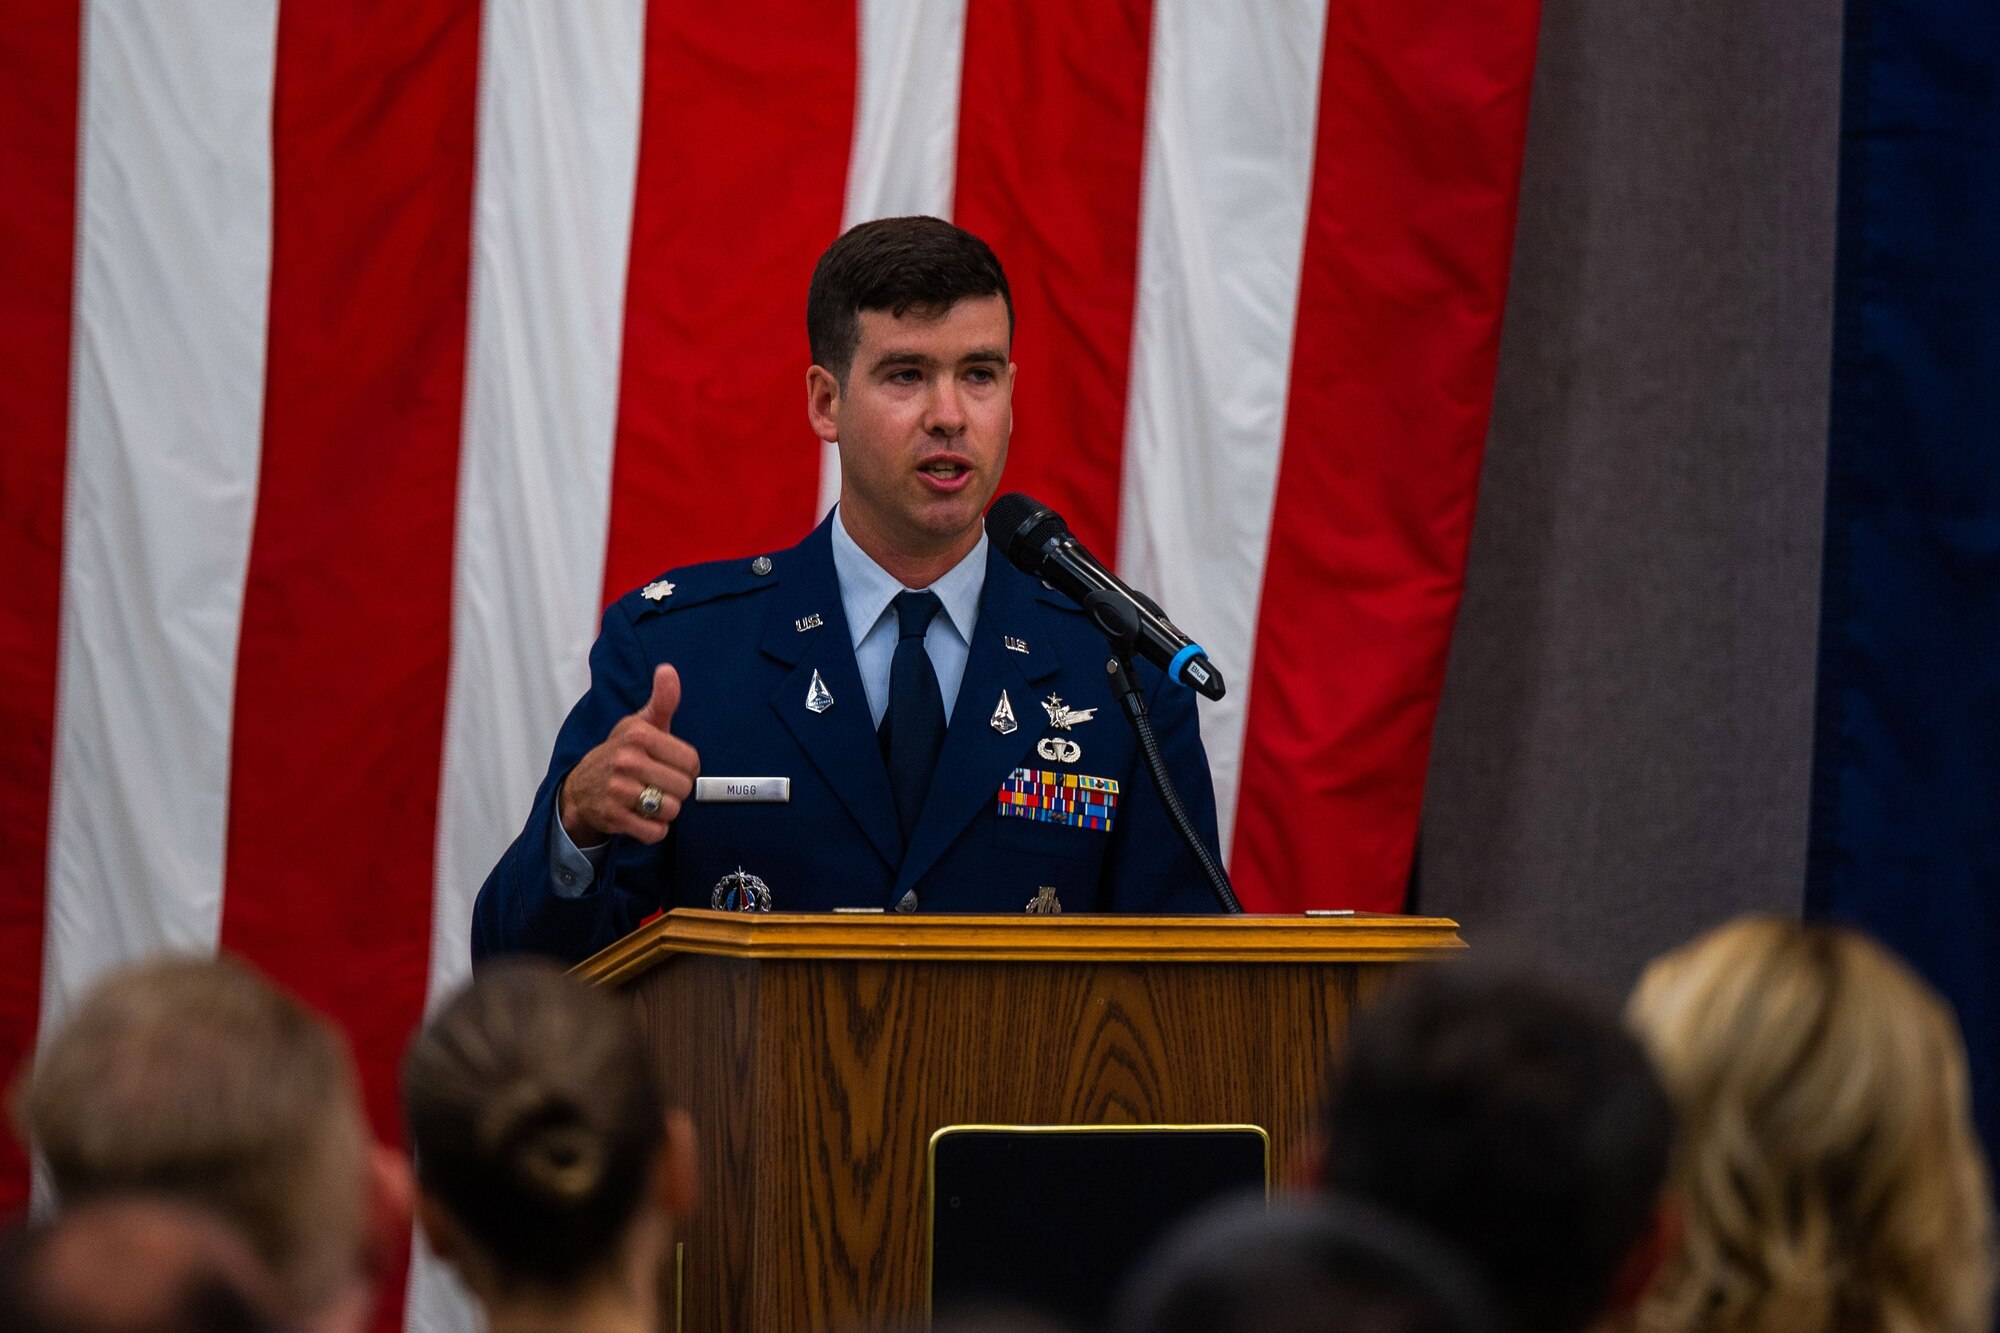 U.S. Space Force Lt. Col. Jordan O.E. Mugg, the newly appointed 18th Space Defense Squadron (18 SDS) commander, speaks during the 18 SDS change of command ceremony at Vandenberg Space Force Base, Calif., June 21, 2023. 18 SDS maintains the most complete satellite catalog of Earth-orbiting artificial objects, currently tracking more than 44,400 objects including about 8,200 active spacecraft, which is available to the public on the website www.Space-Track.org. (U.S. Space Force photo by Tech. Sgt. Luke Kitterman)